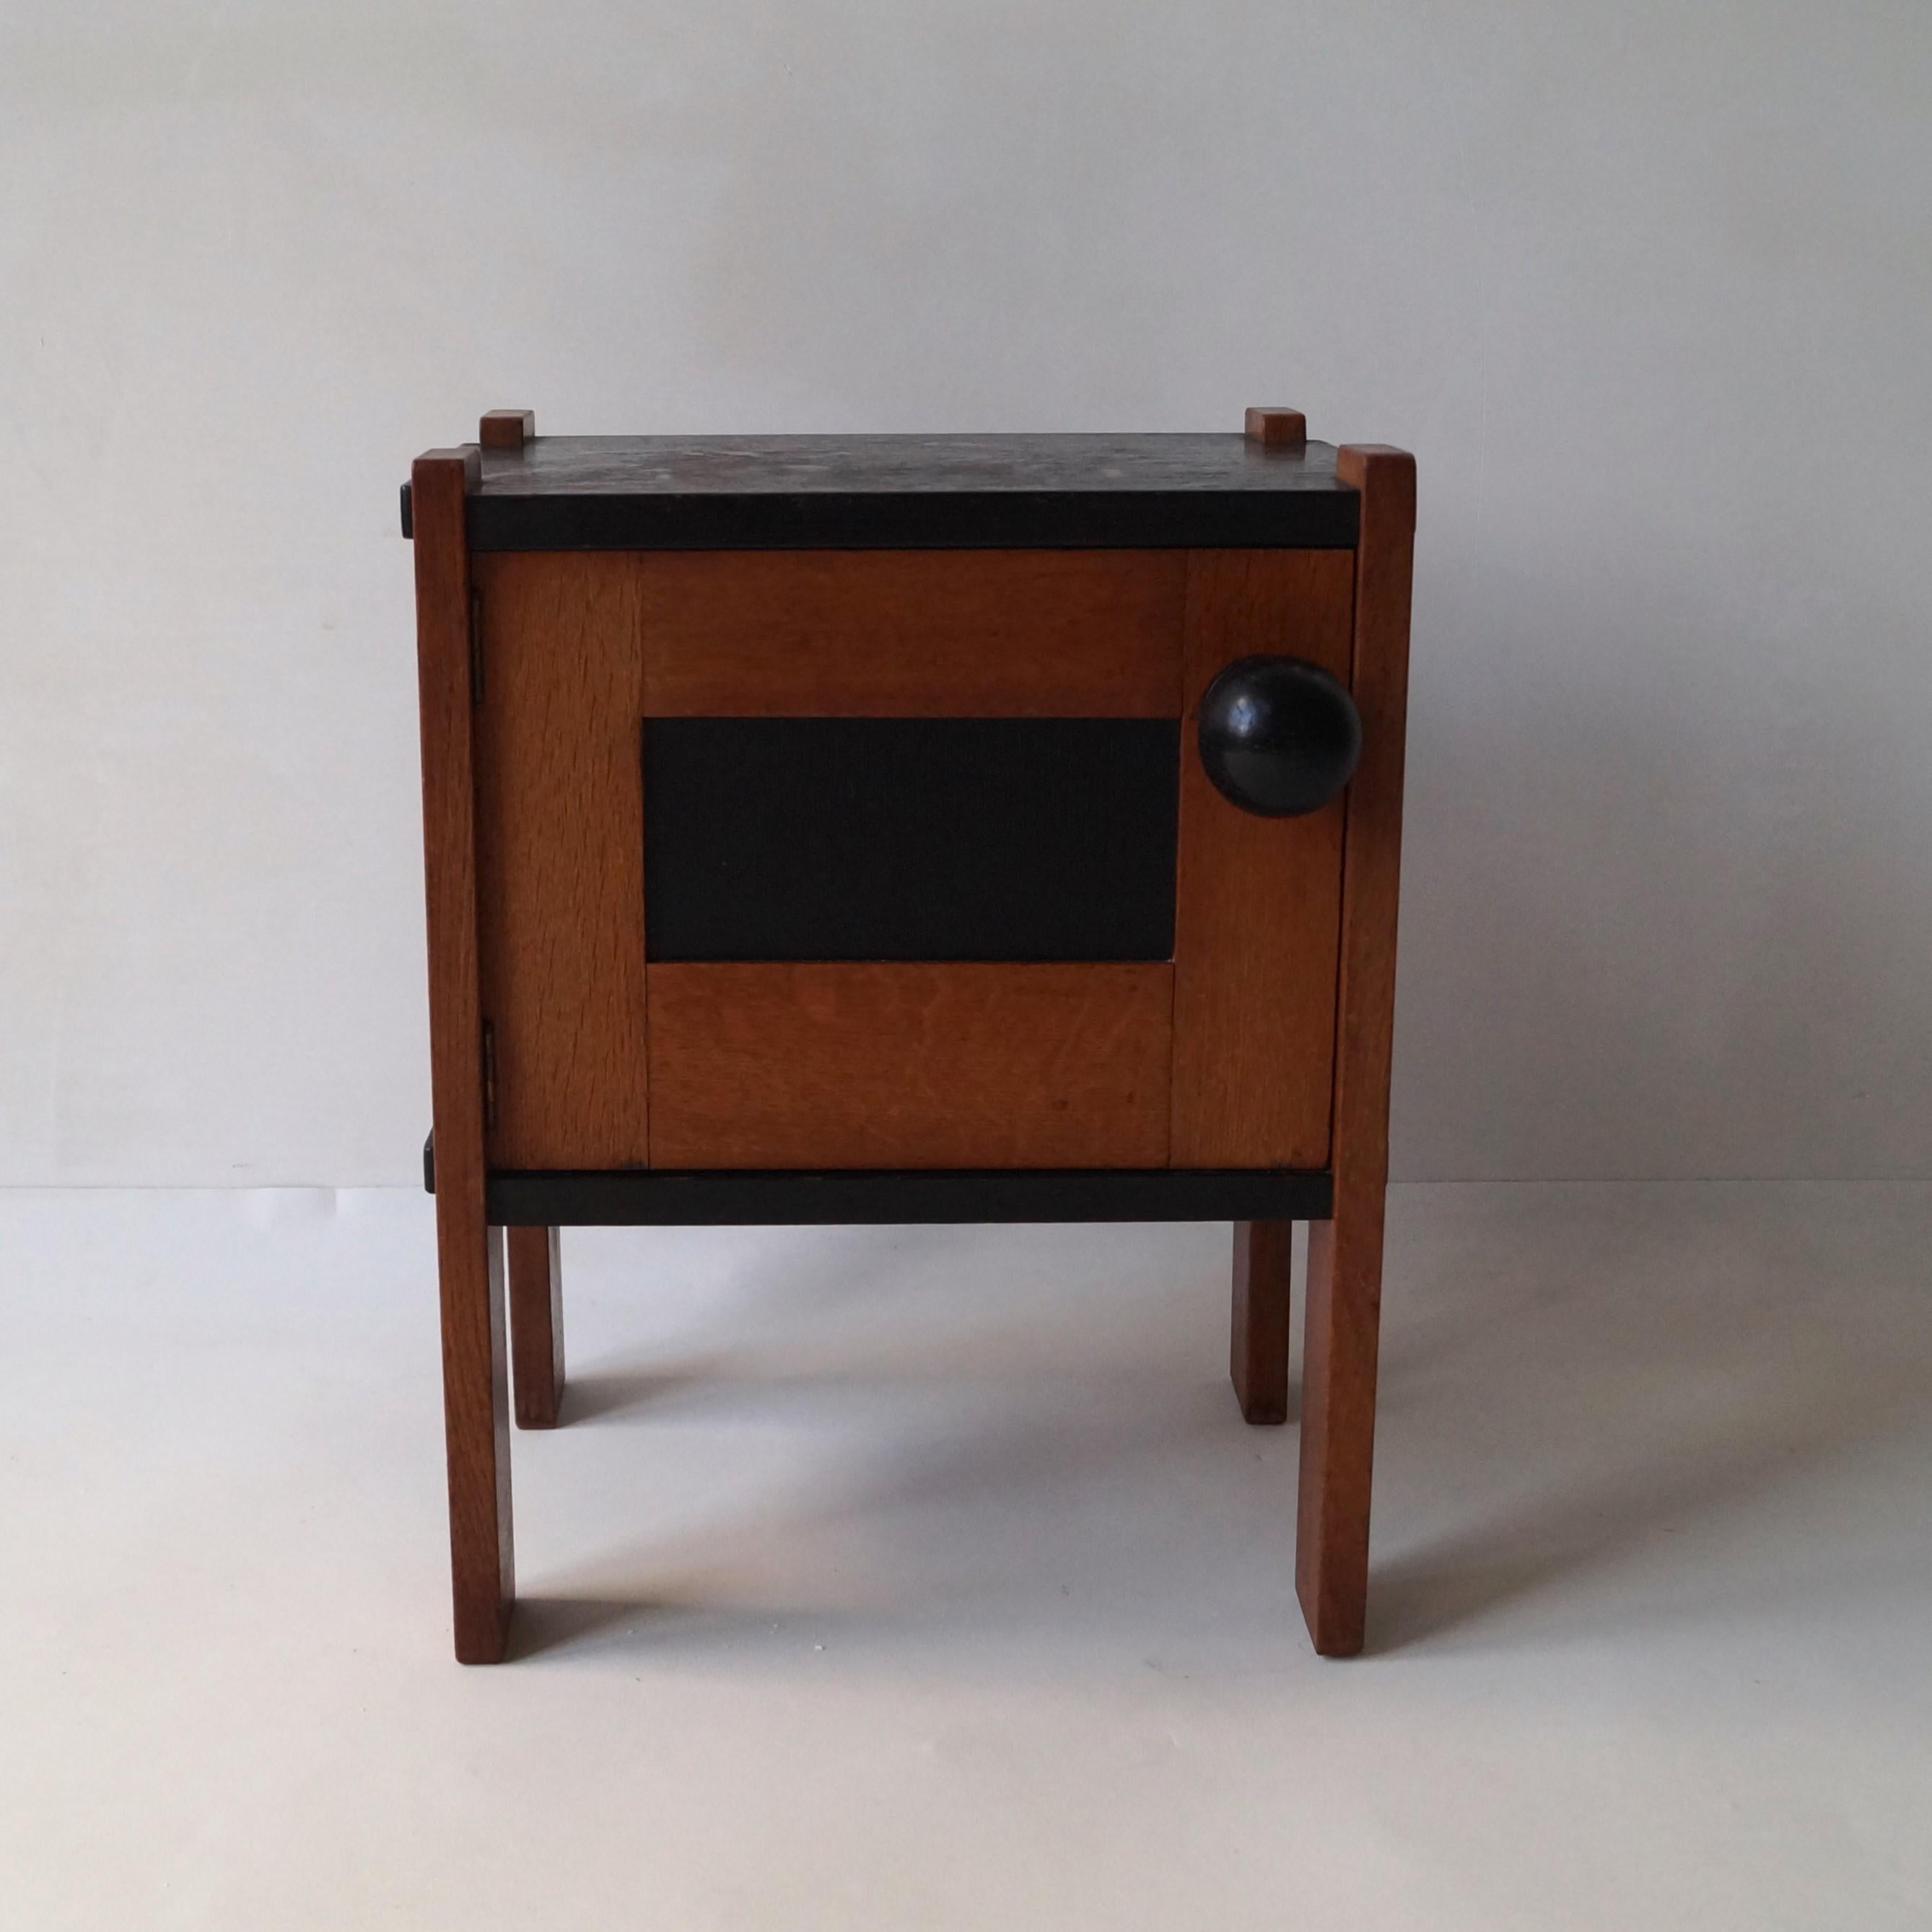 A lovely proportioned small Haagse School 1920s nightstand/cupboard by famous Dutch interior designer Cor Alons. It's executed in solid high quality oak, has a blackened panel on the door and an oversized door knob (where the early work of Alons is